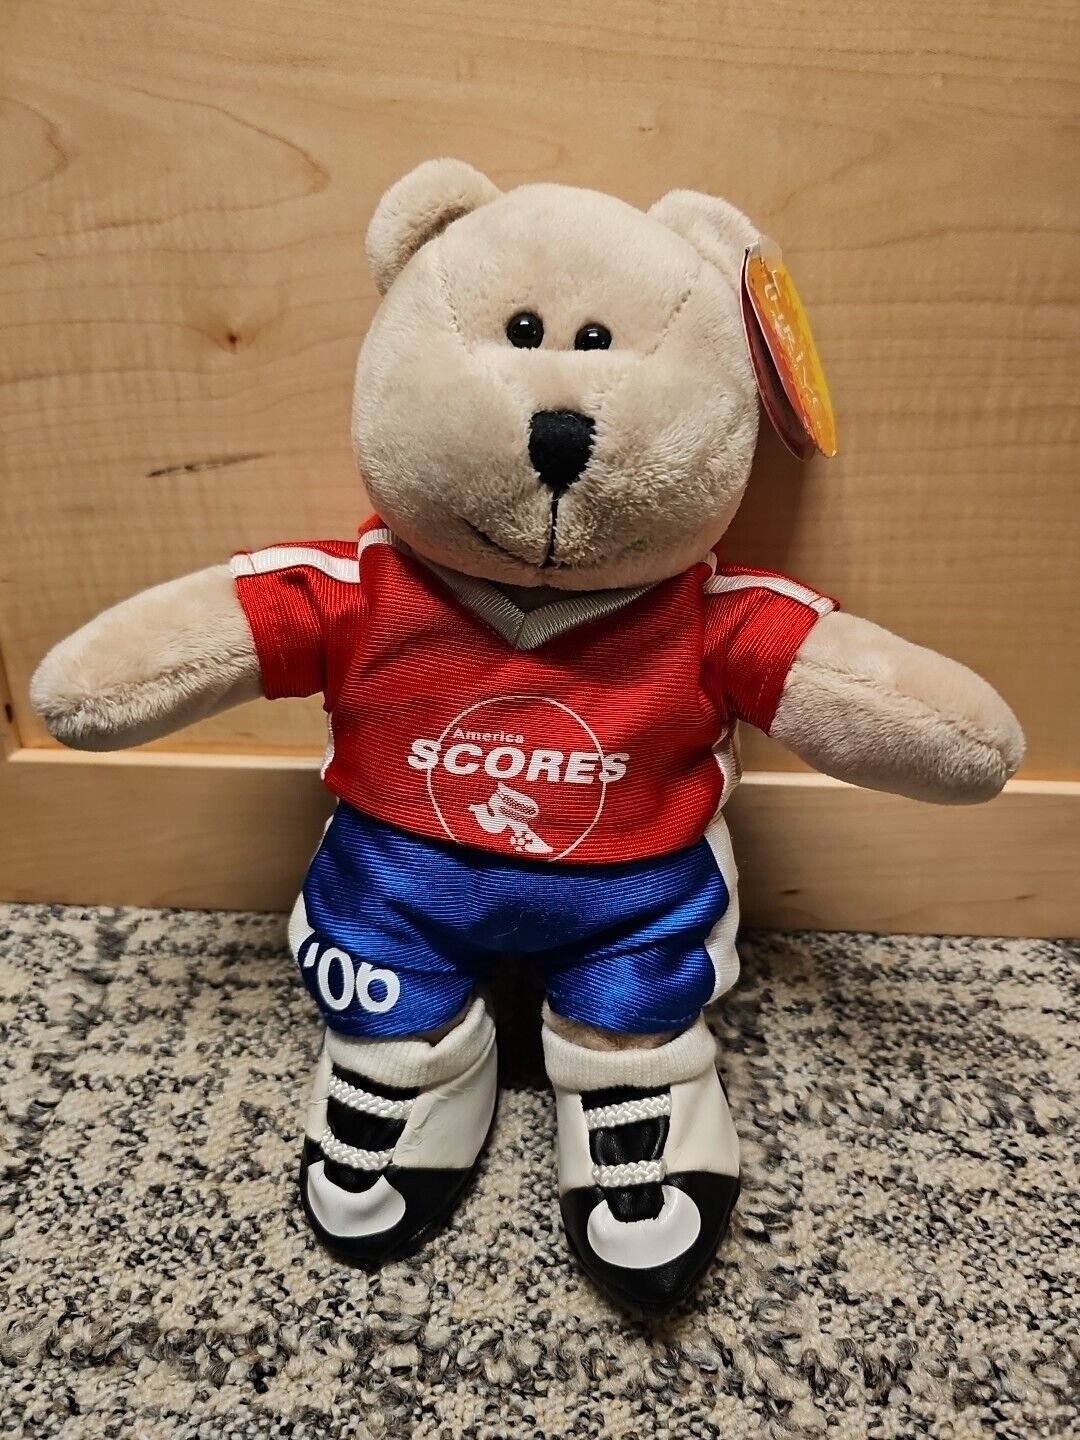  STARBUCKS THRIVE SCORES SOCCER BEARISTA BEAR 2006 with Tag